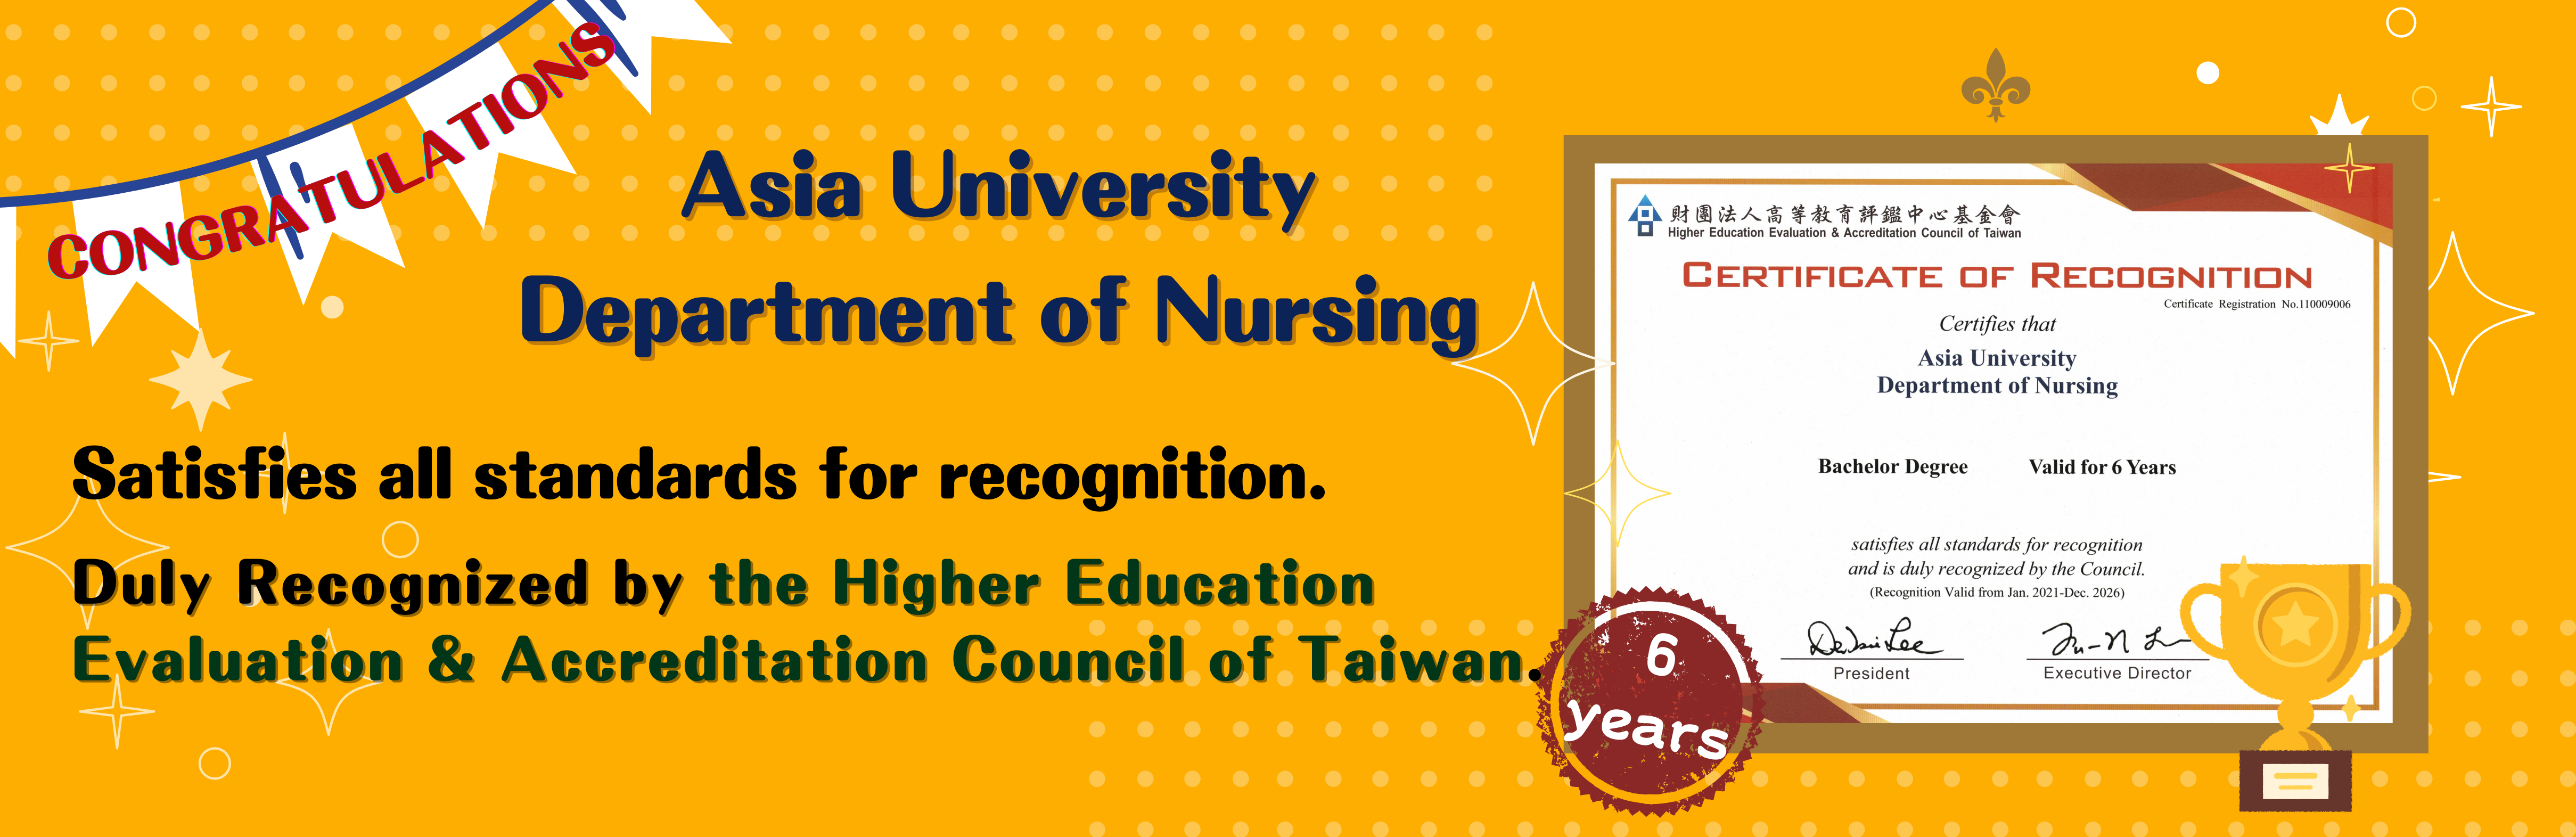 Duly Recognized by the Higher Education Evaluation & Accreditation Council of Taiwan